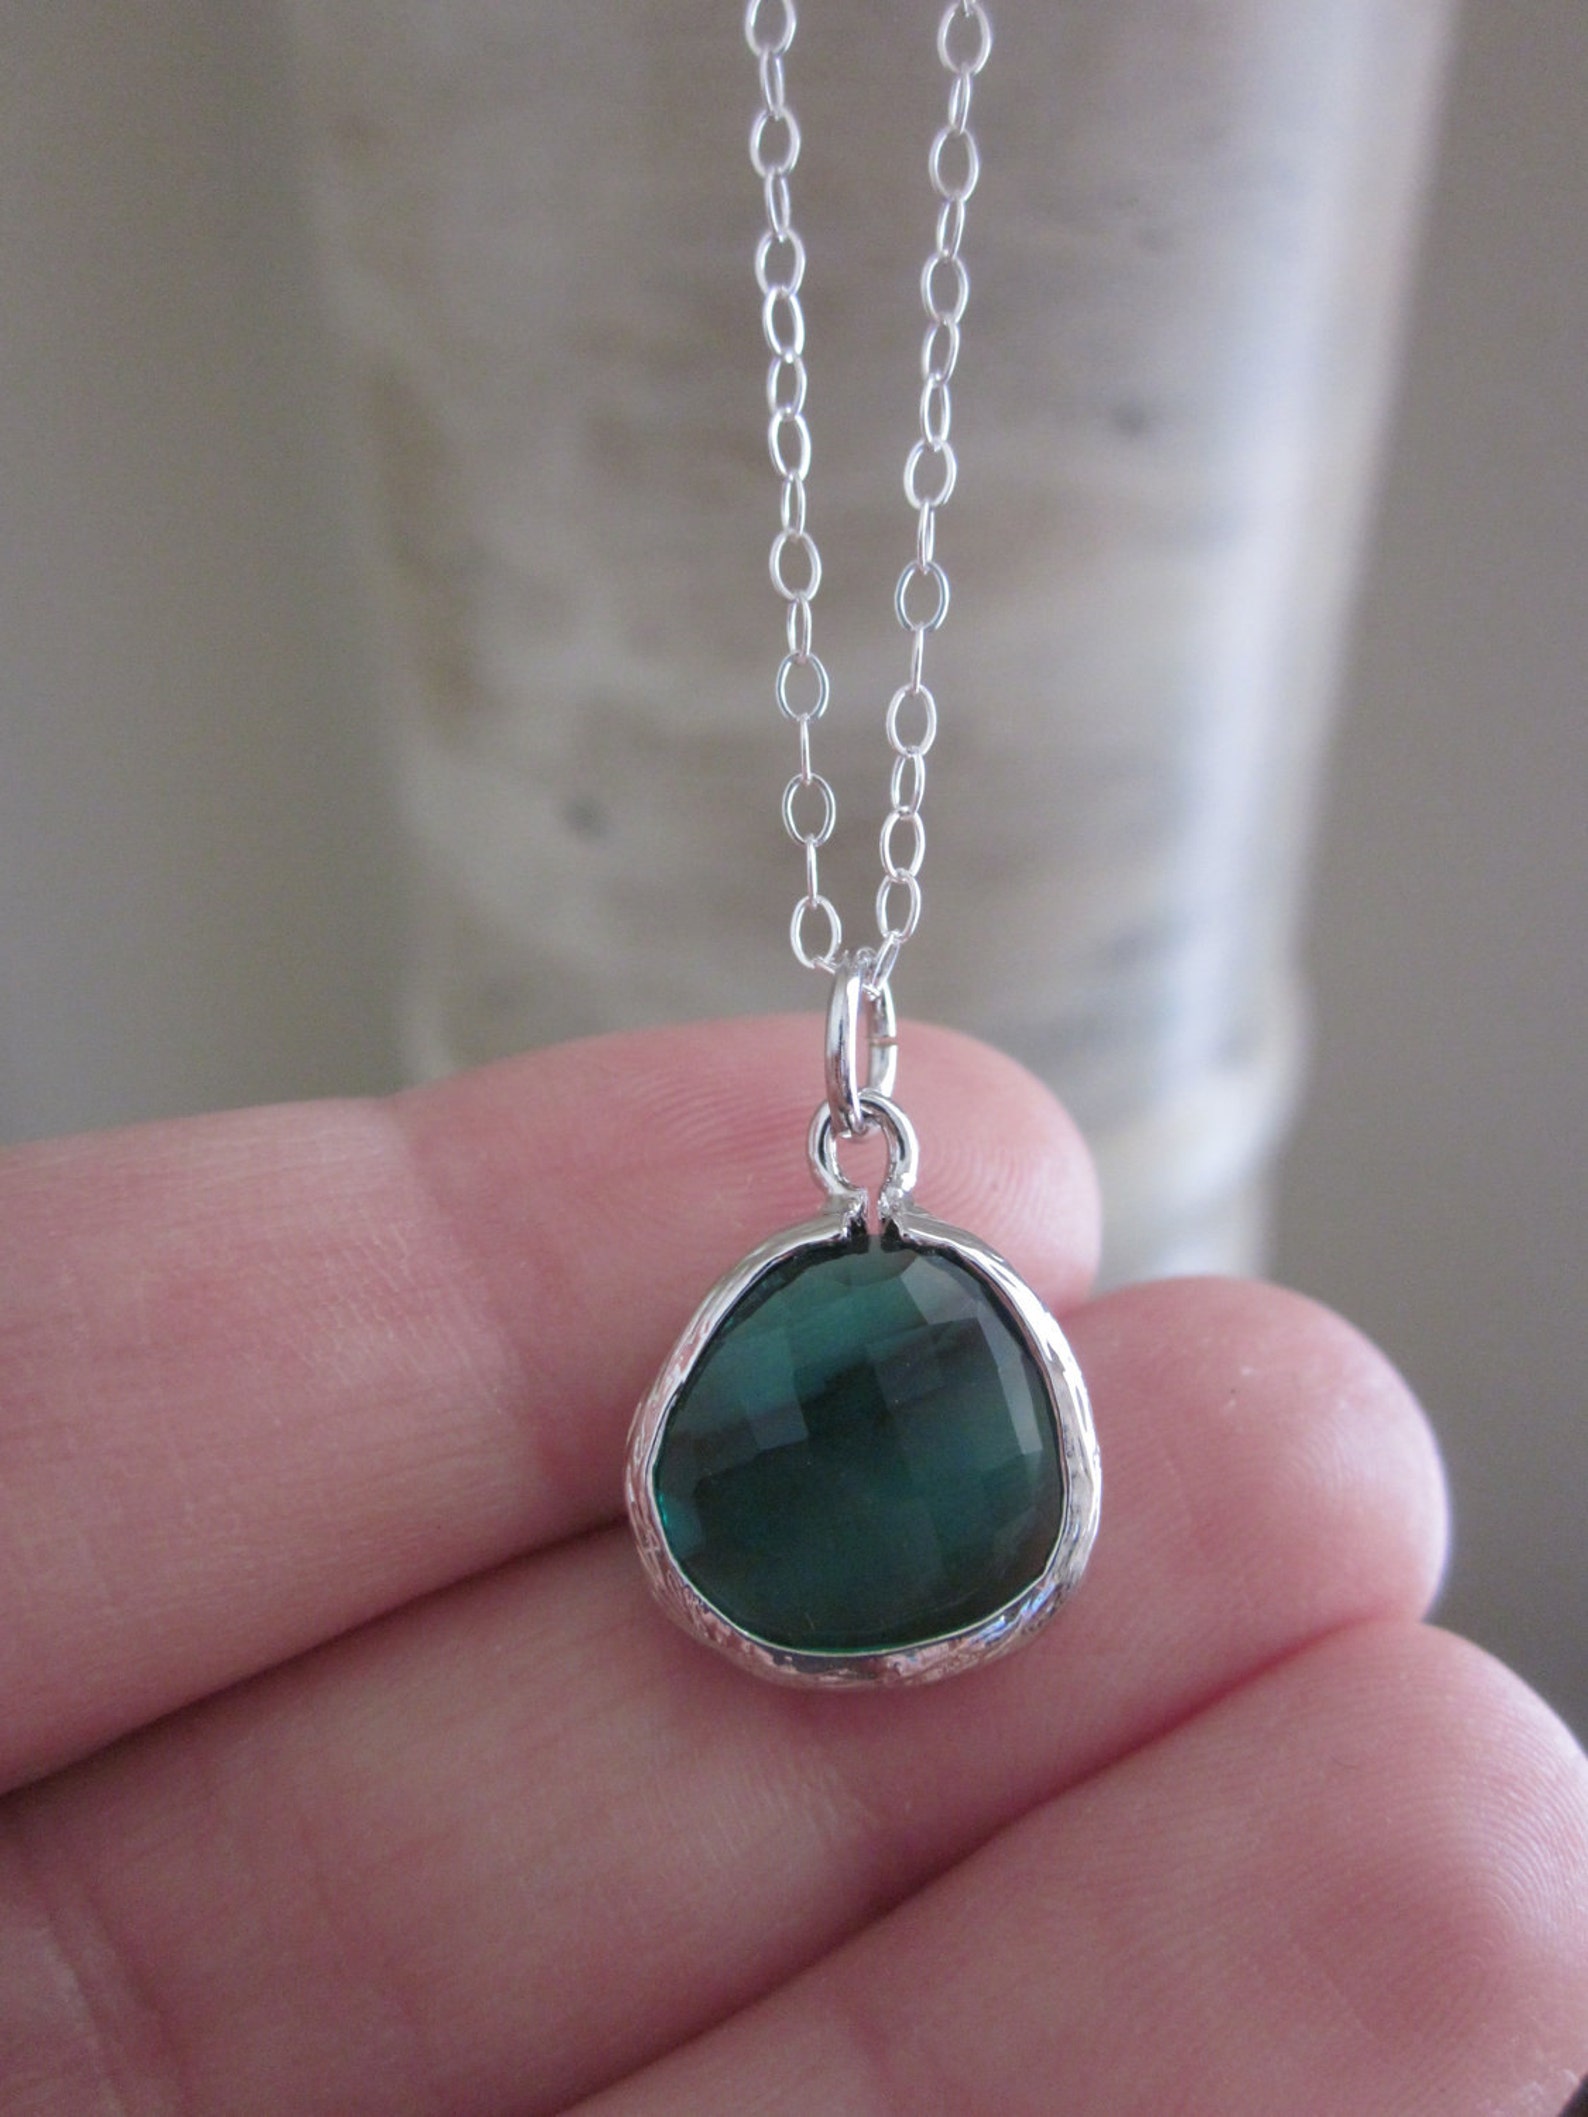 Emerald Green Glass Pendant Necklace on Sterling Silver Chain - Etsy